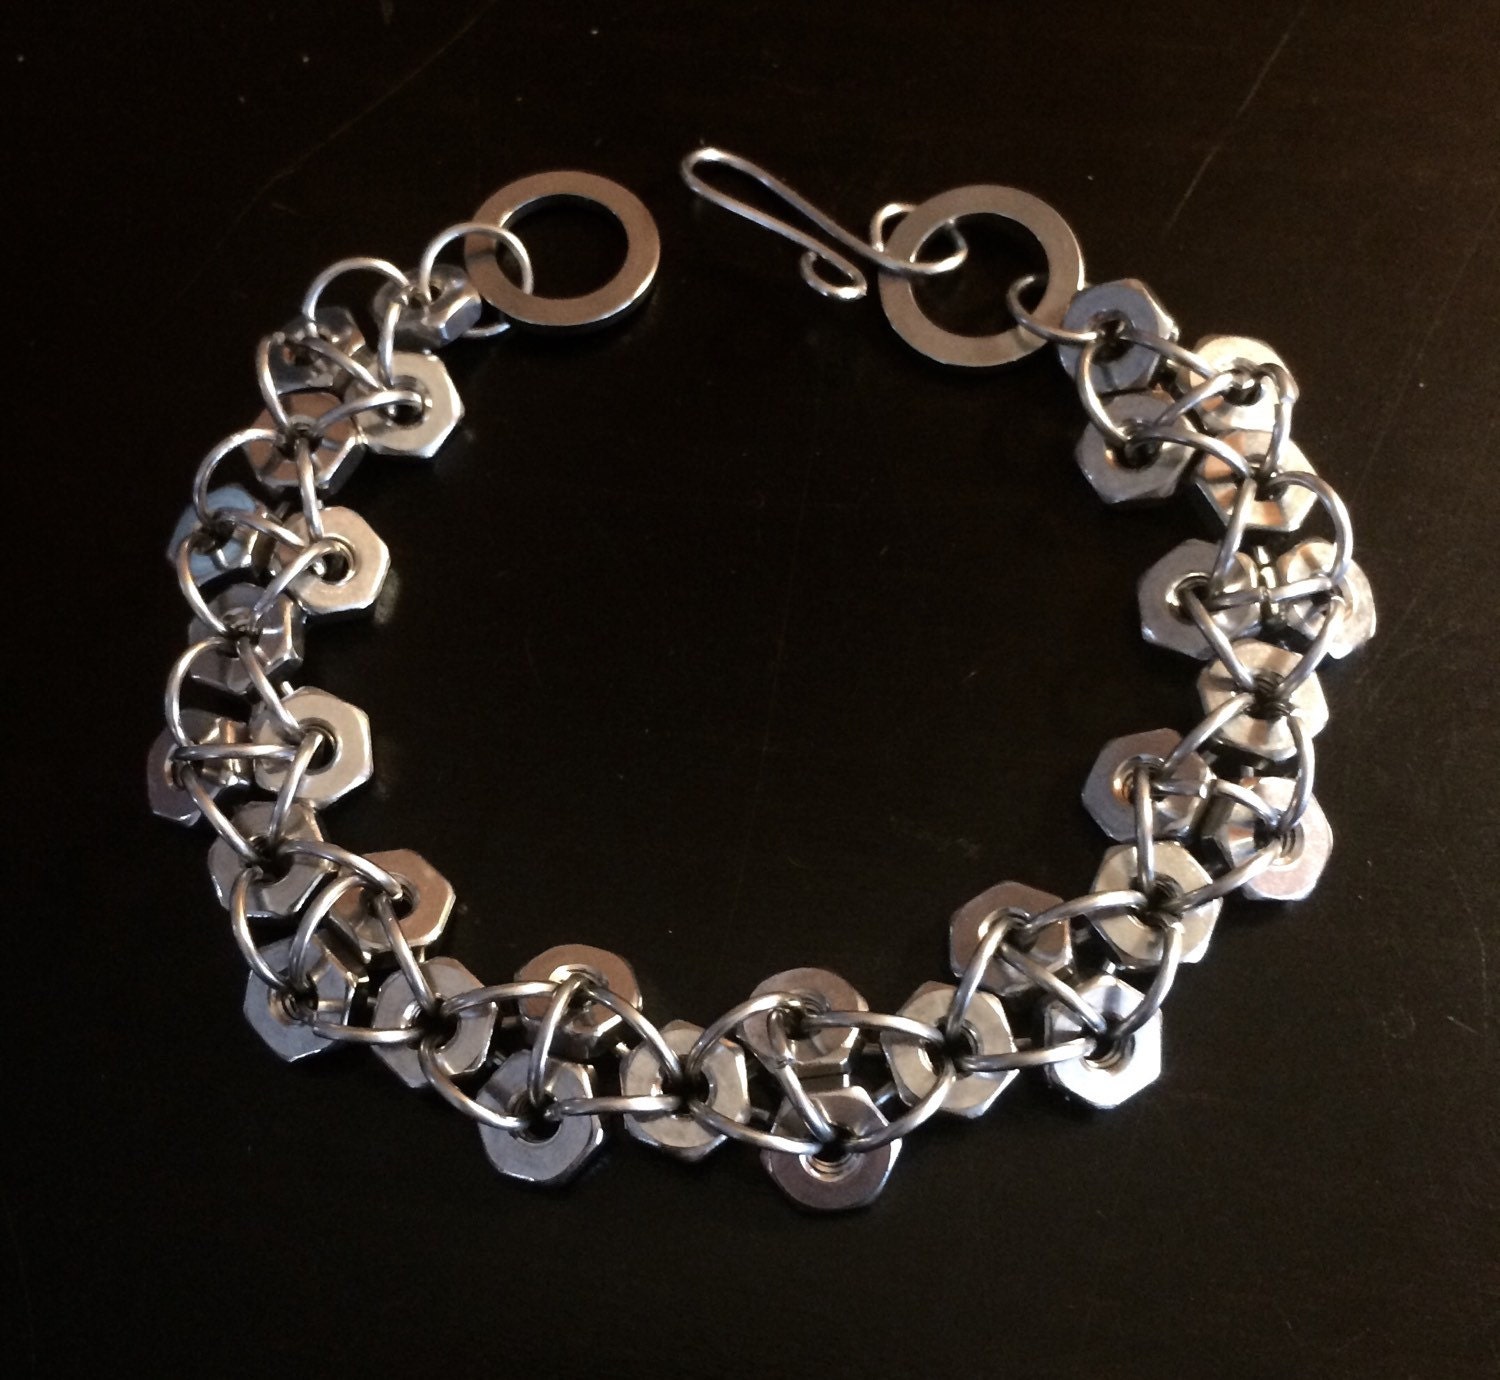 Handmade Stainless Steel Chainmaille Bracelet by AZCopperCreations